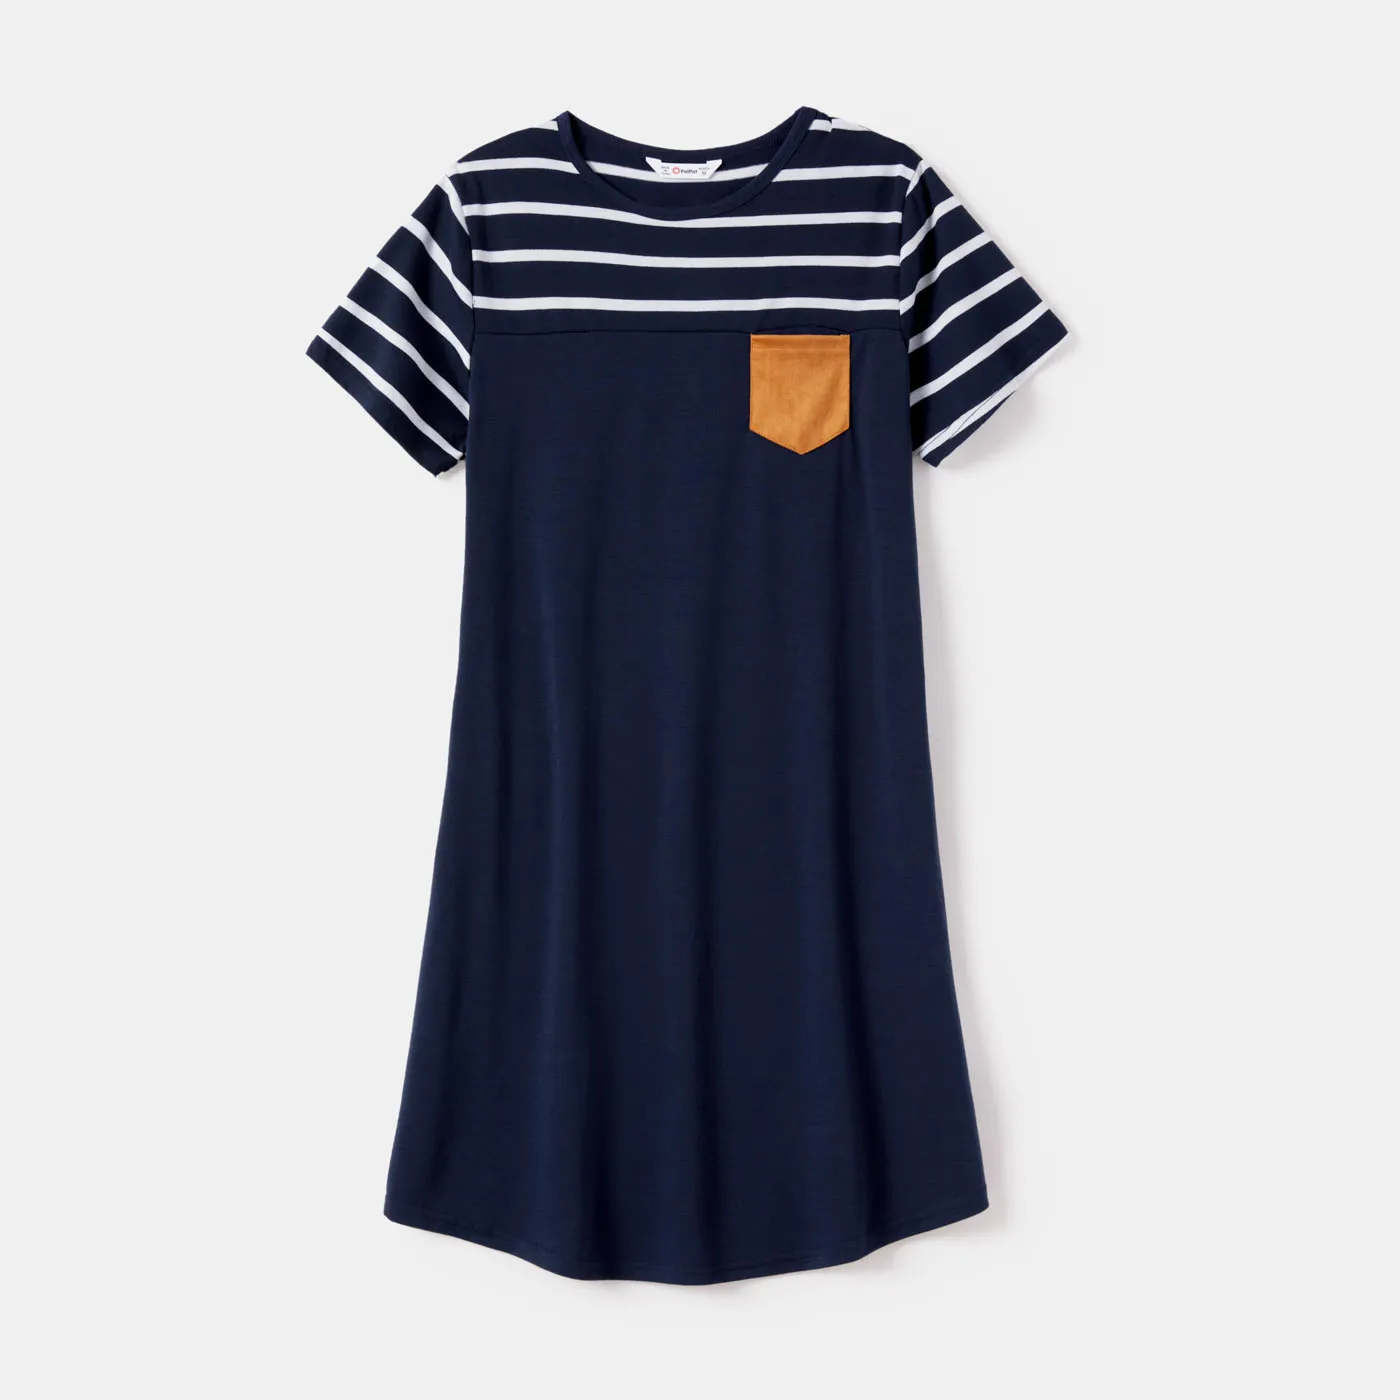 Family Matching Striped Spliced Dresses and Short-sleeve T-shirts Sets